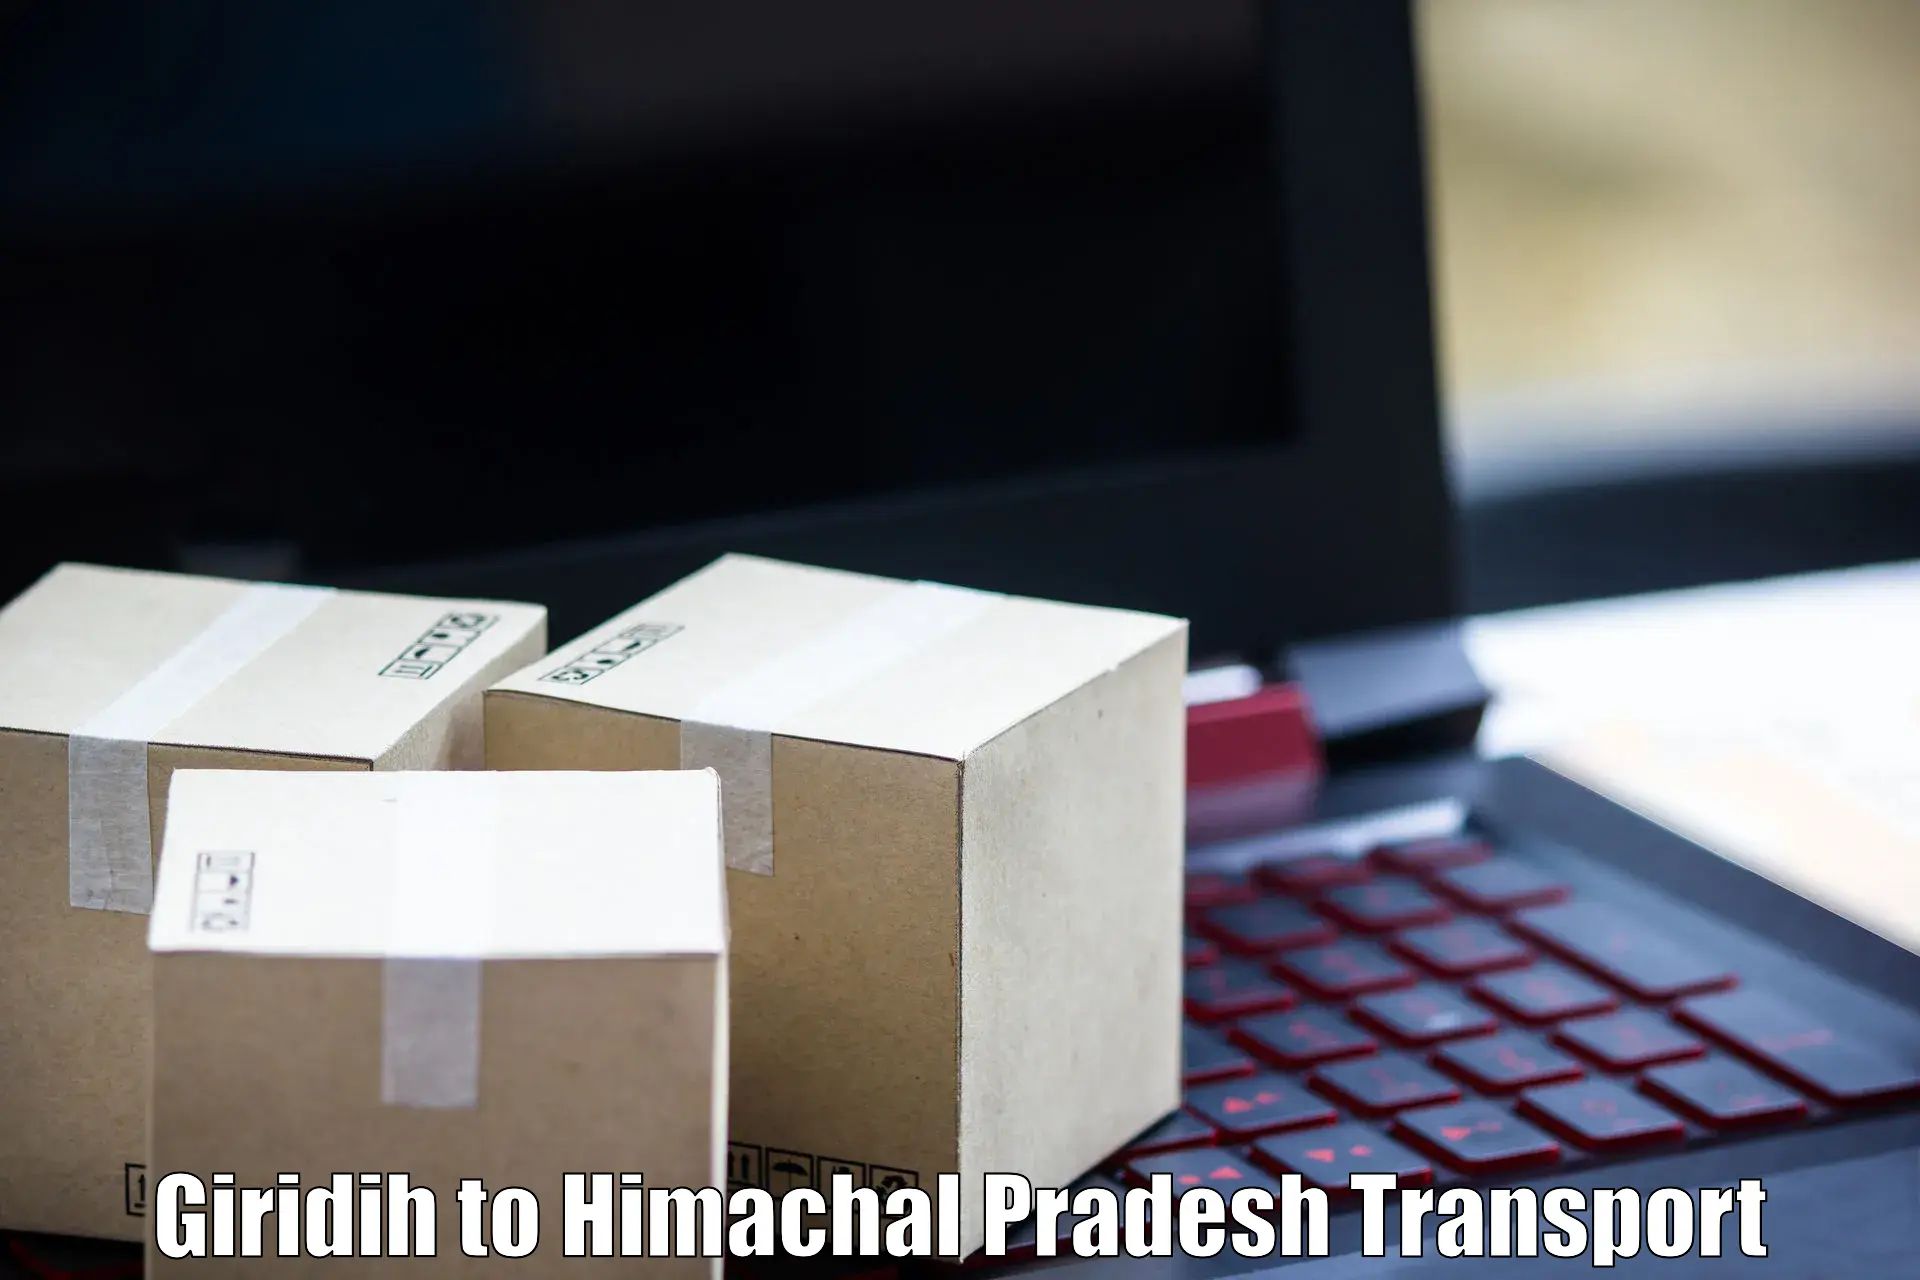 Air freight transport services in Giridih to Nalagarh